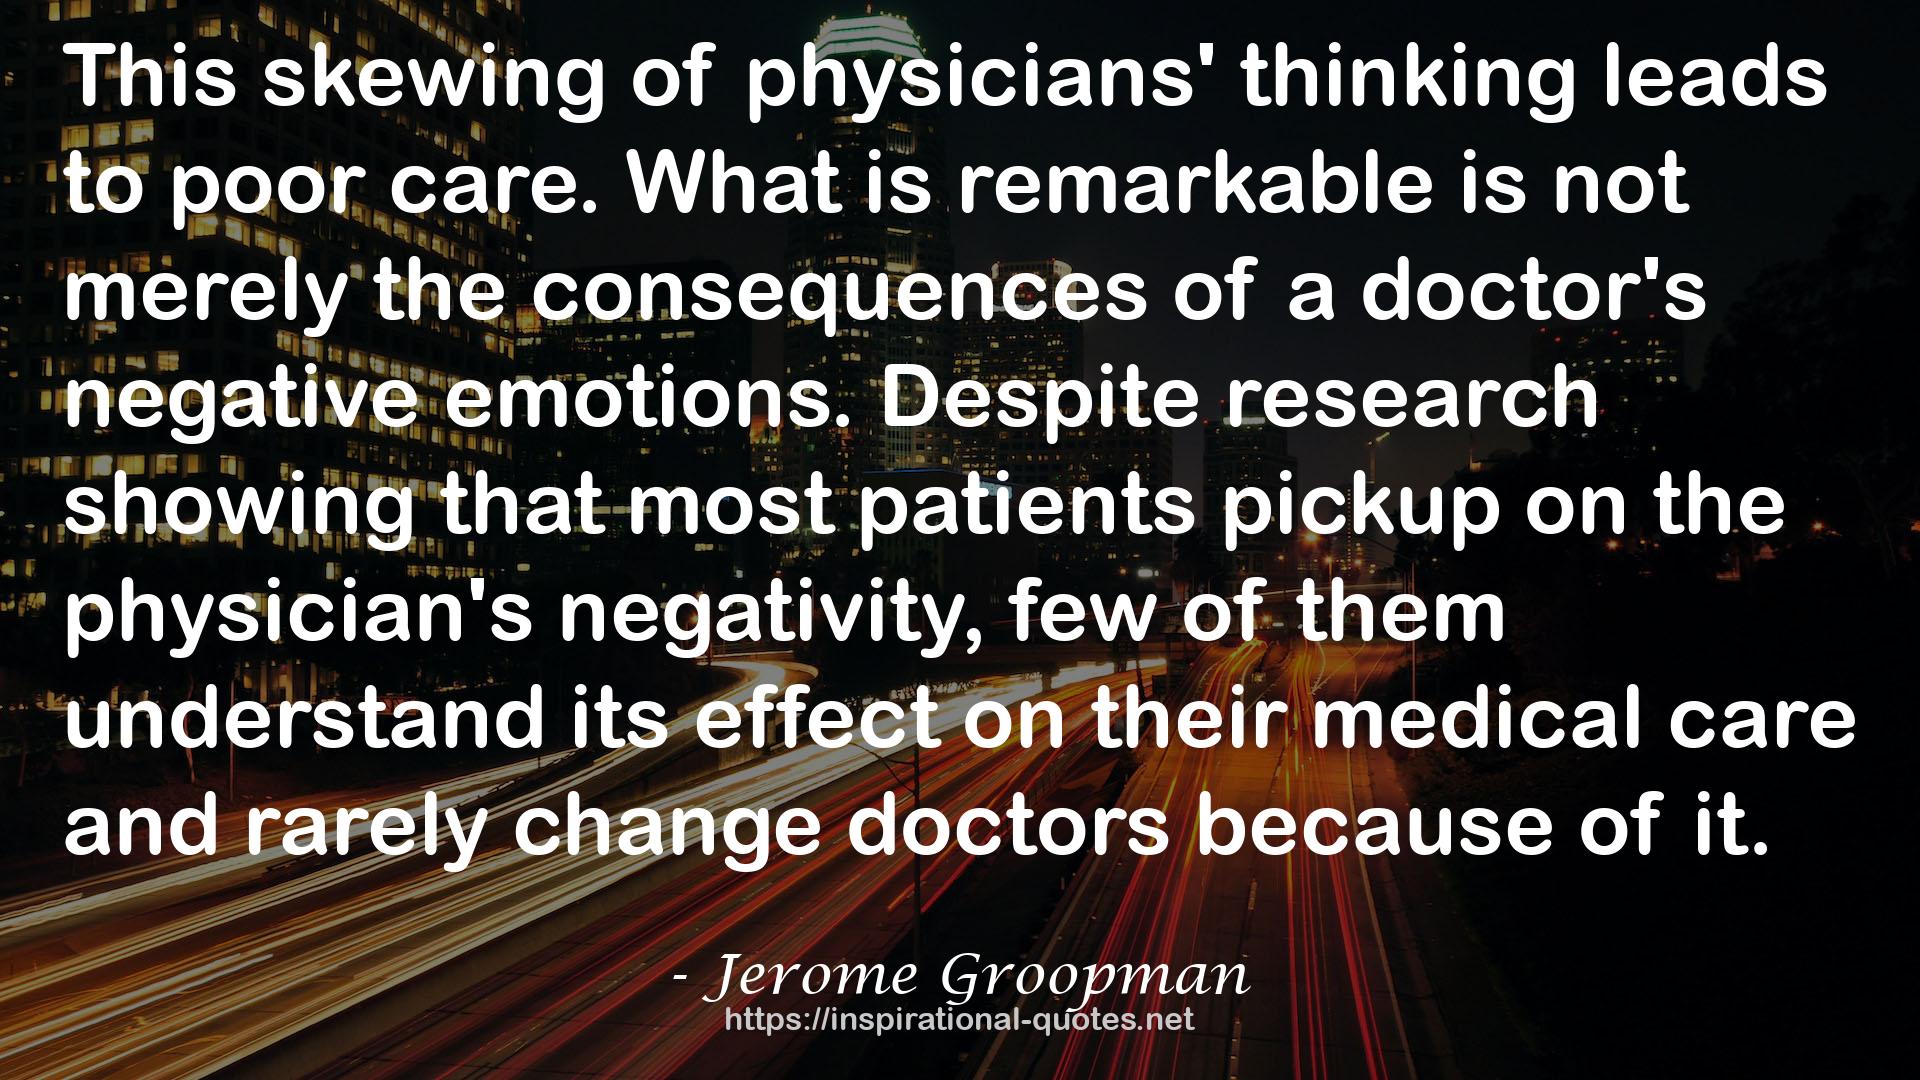 Jerome Groopman QUOTES